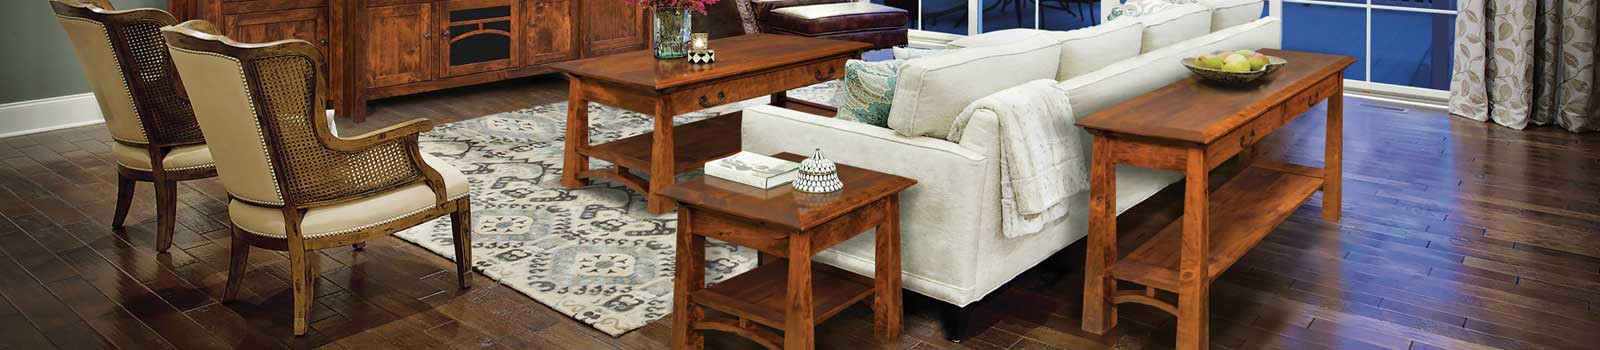 Discounted Price amish living room furniture